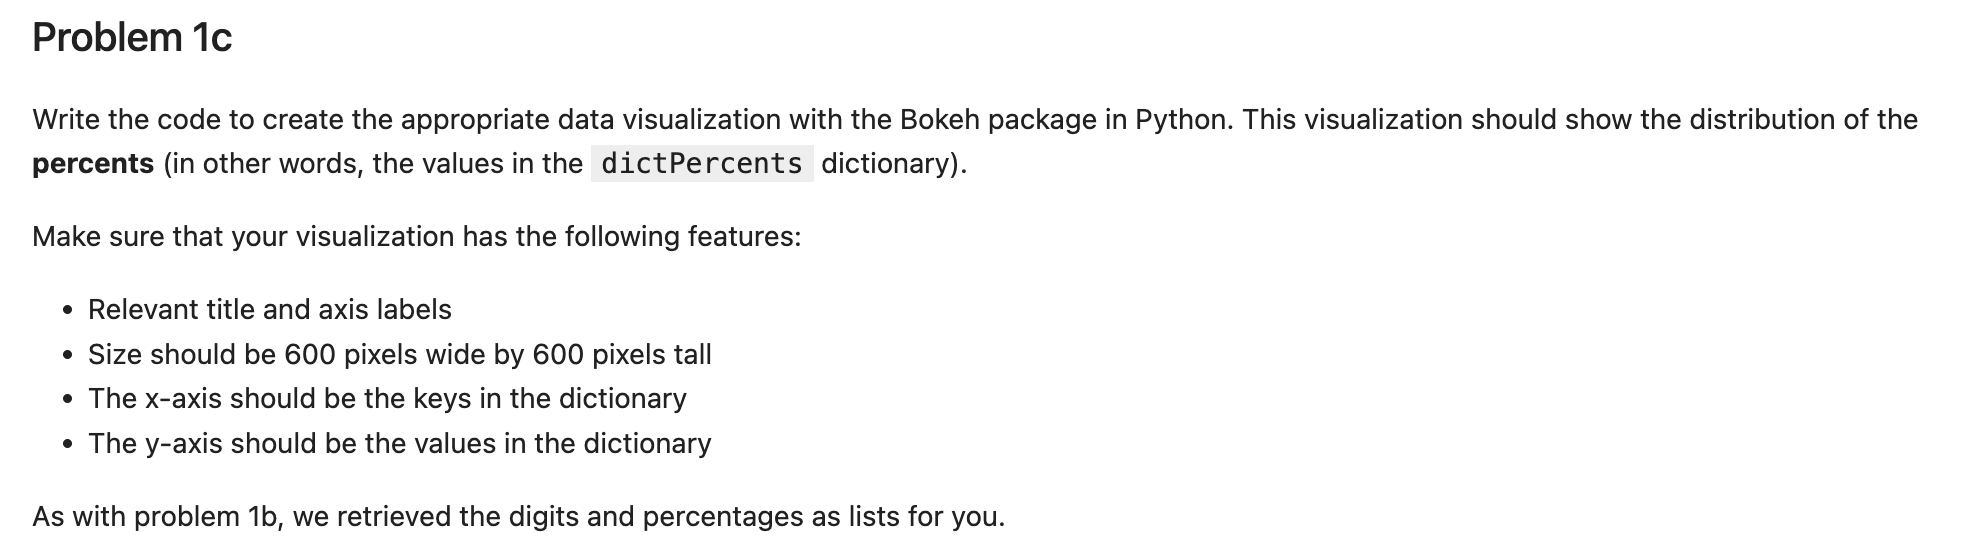 Problem 1c Write the code to create the appropriate data visualization with the Bokeh package in Python. This